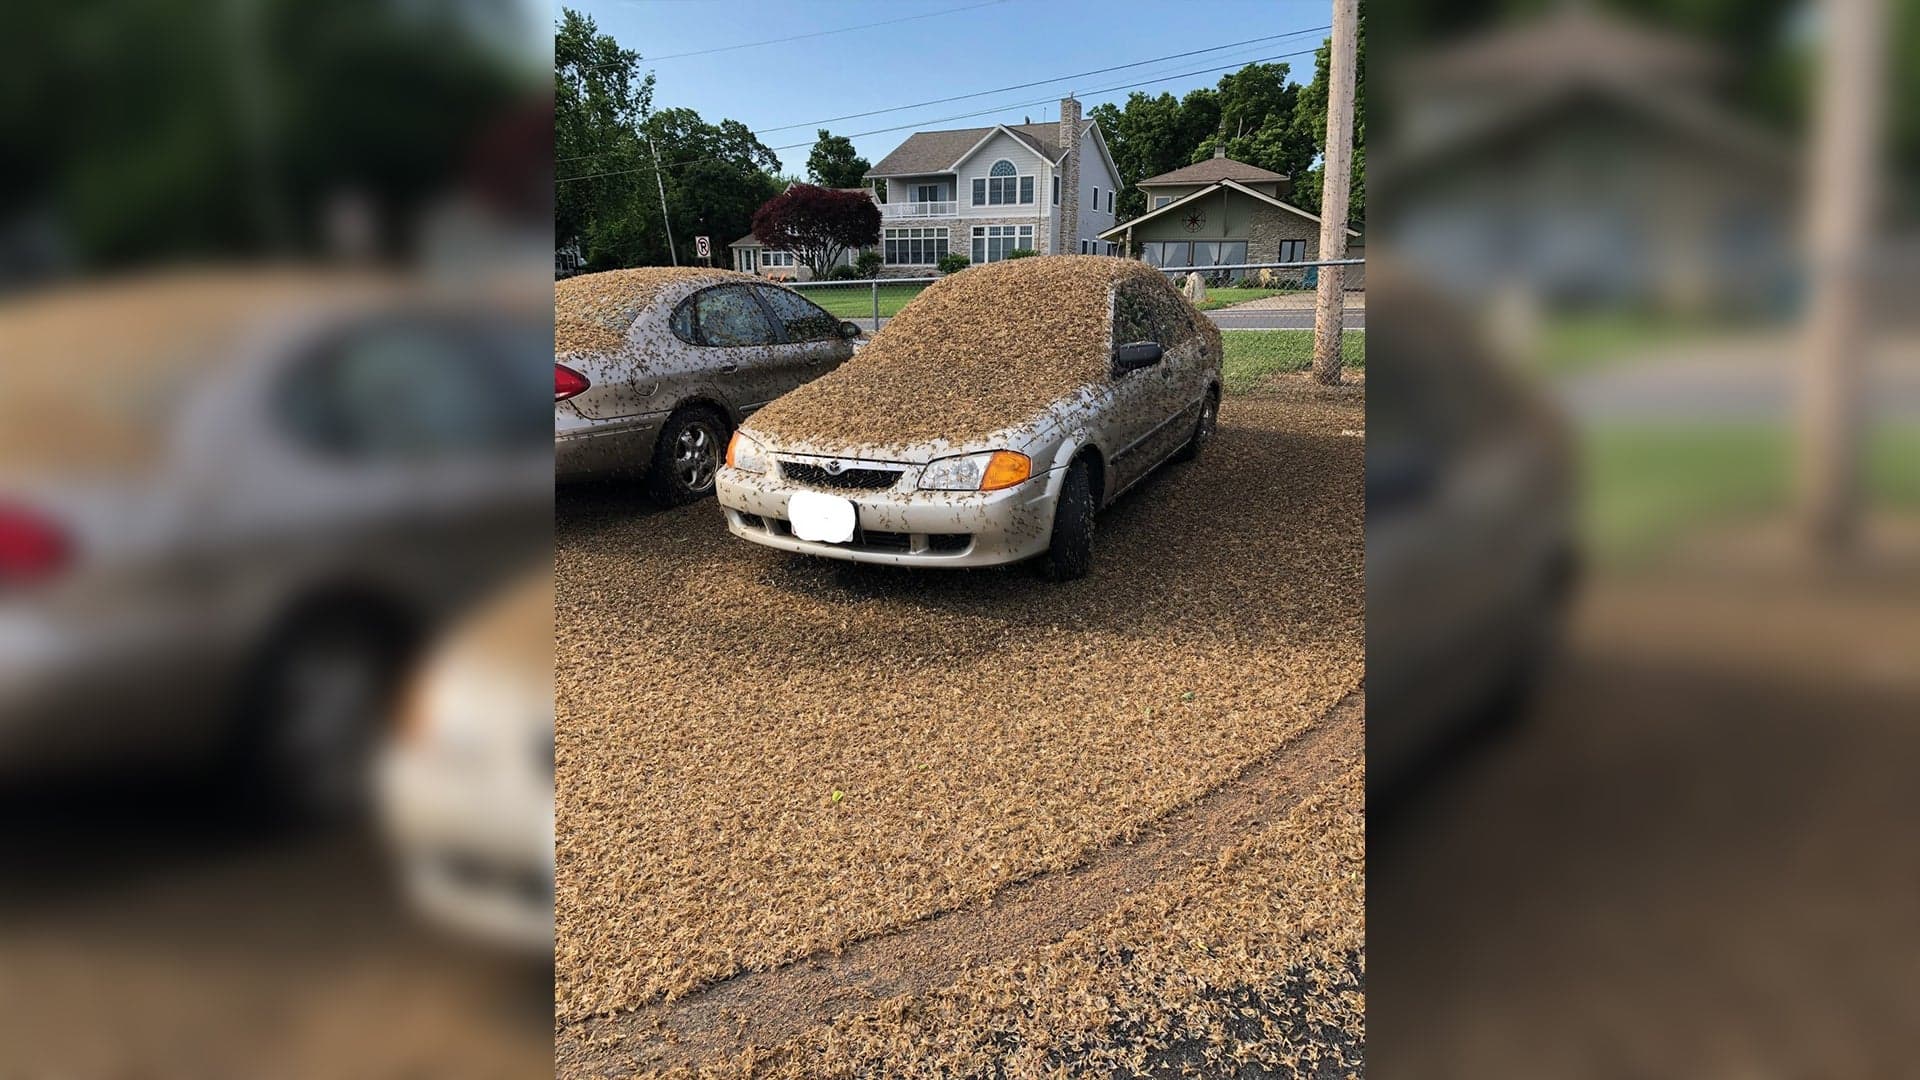 This Photo of a Mazda Covered in Thousands of Bugs Is Horrifyingly Real